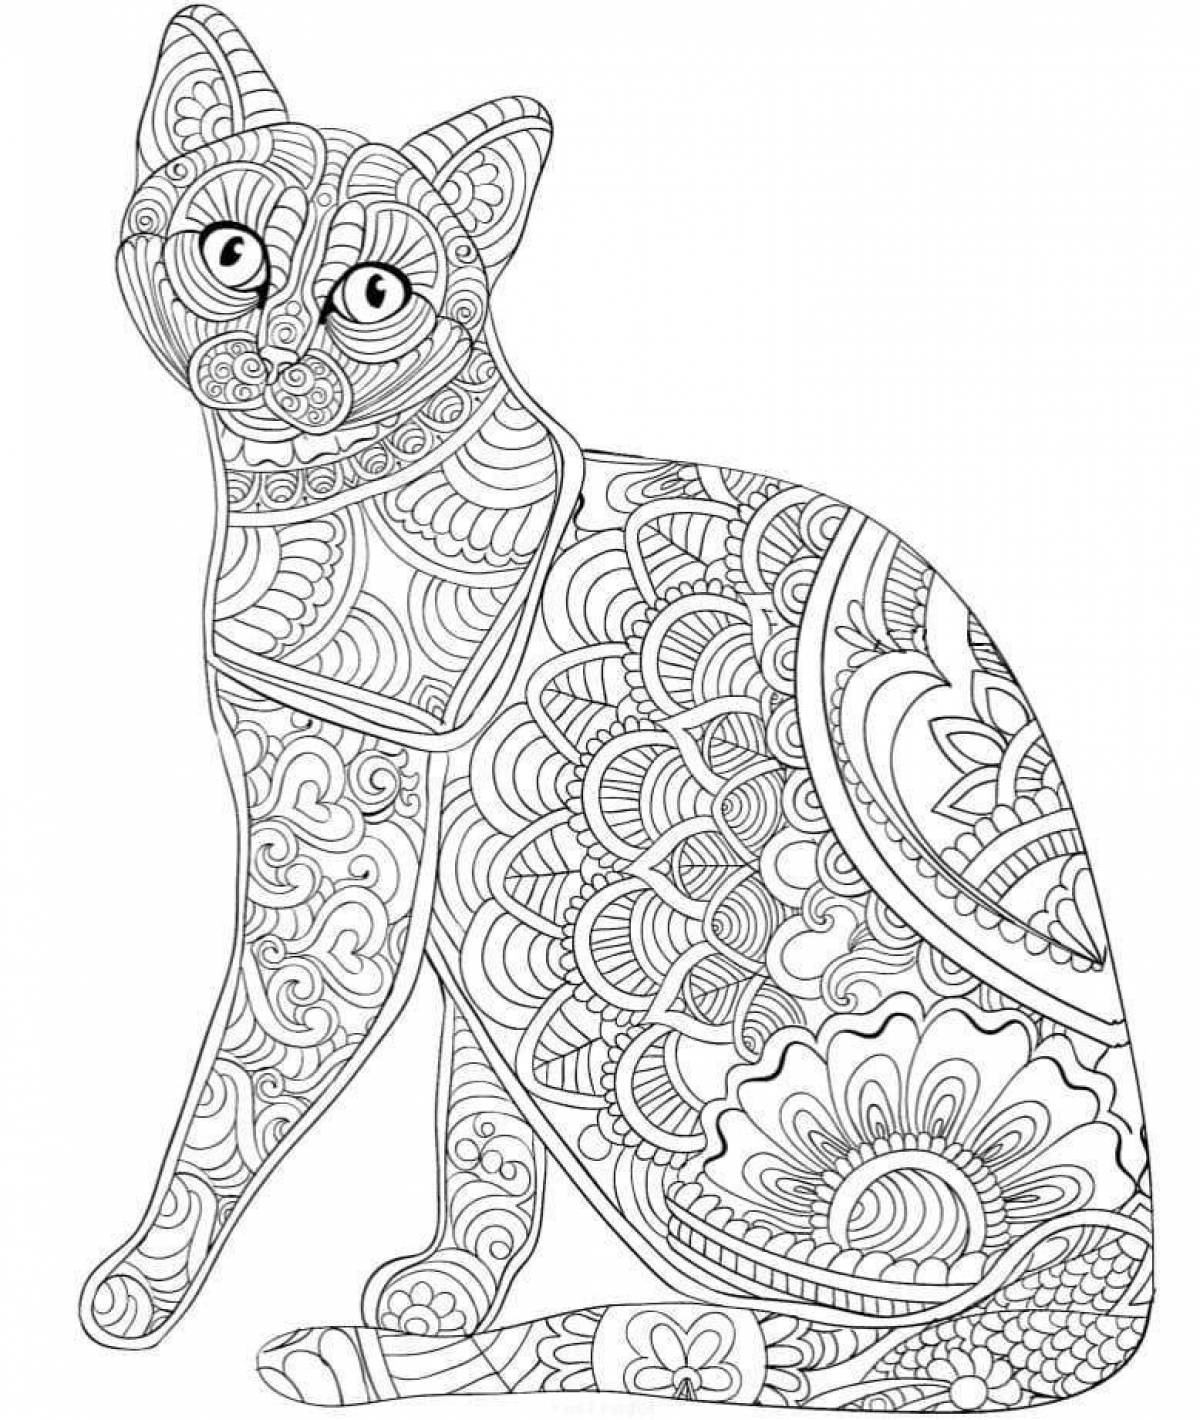 Colourful coloring cat antistress